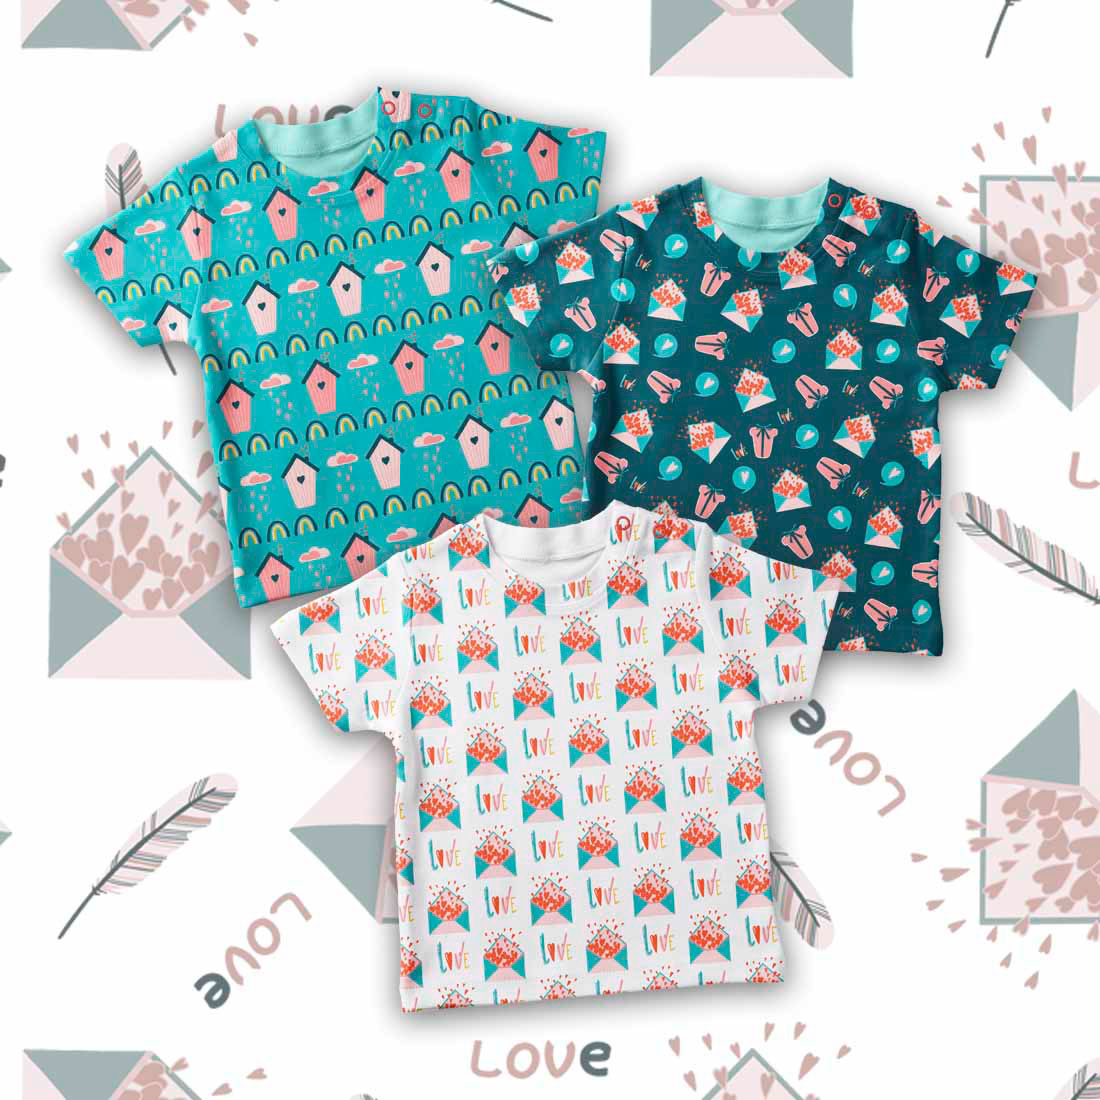 Images of T-shirts with beautiful patterns on the theme of Valentines Day.